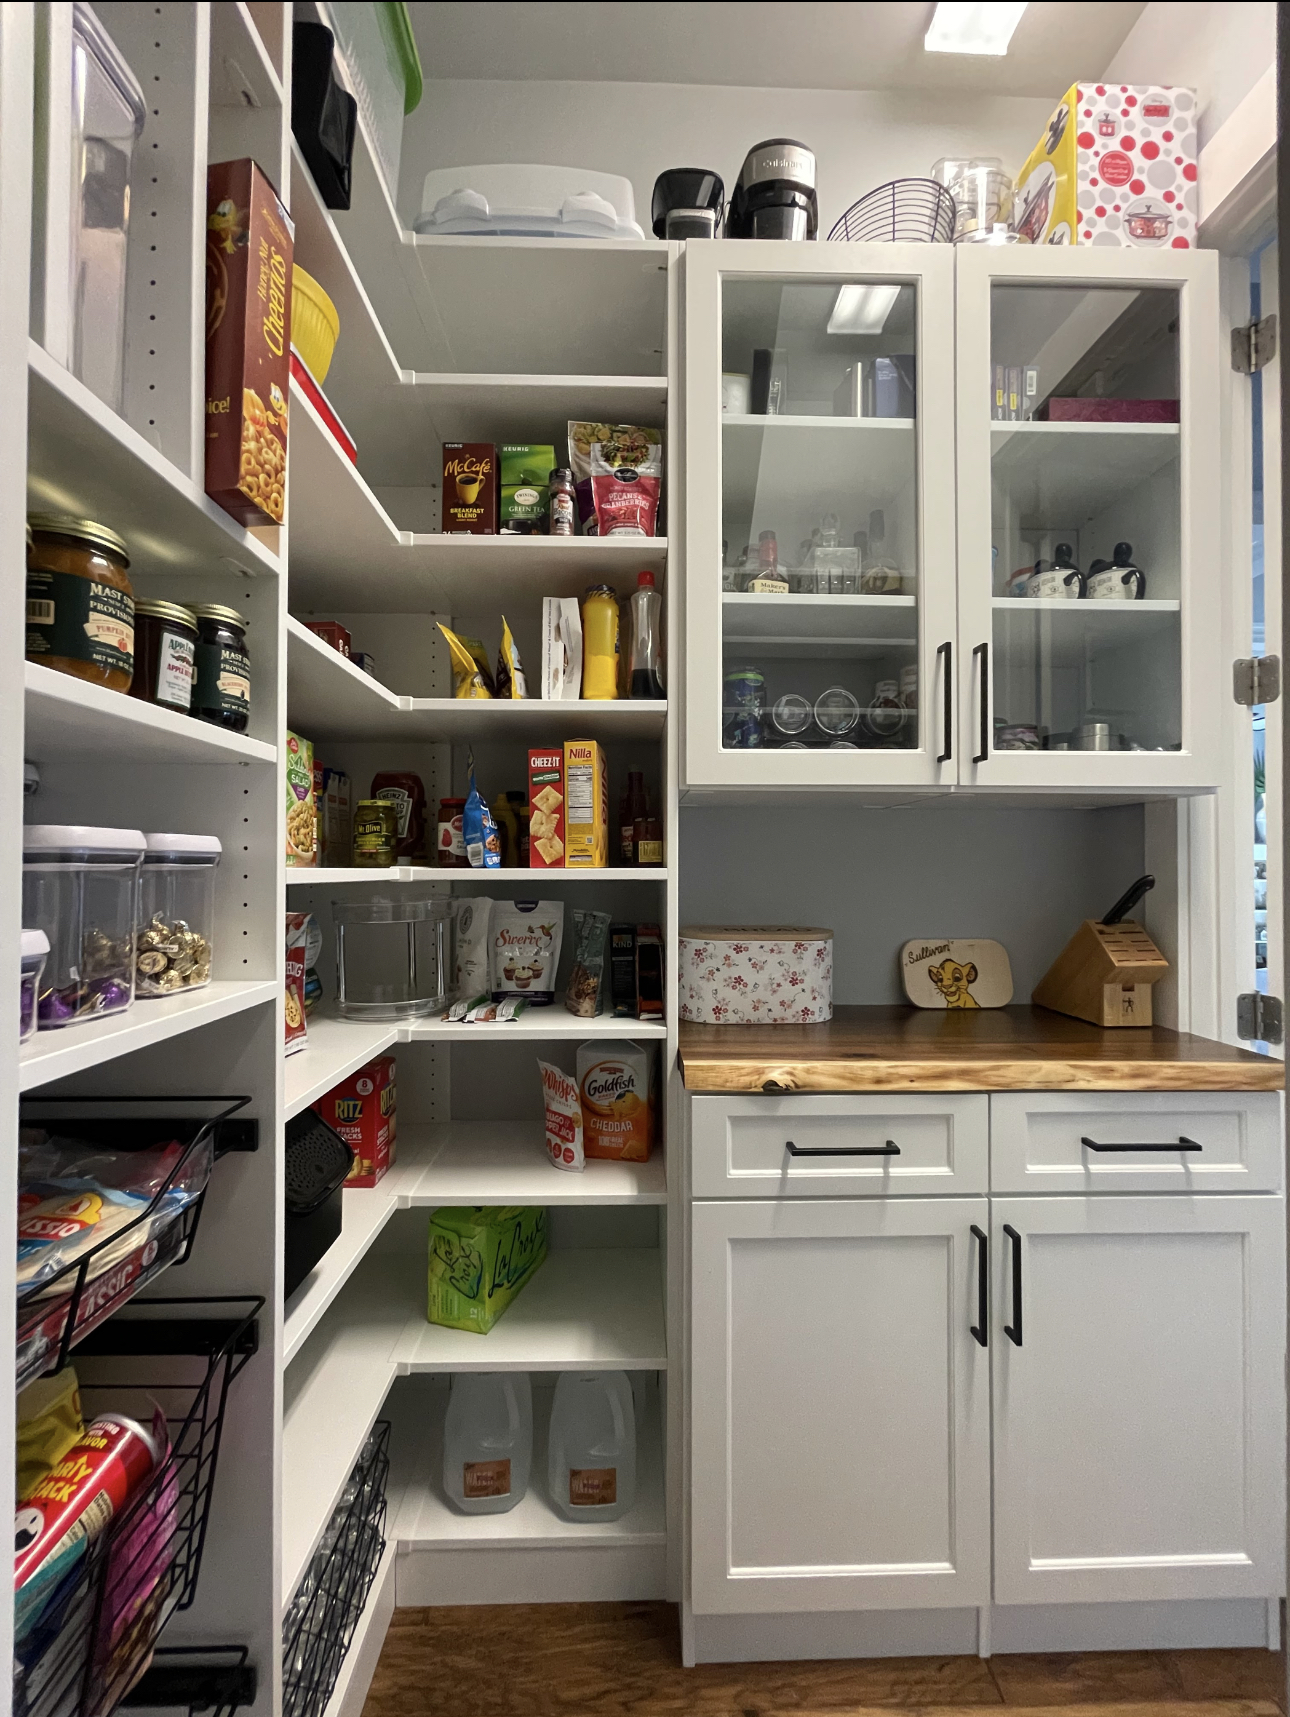 Utilizing pantry space to maximize available space.